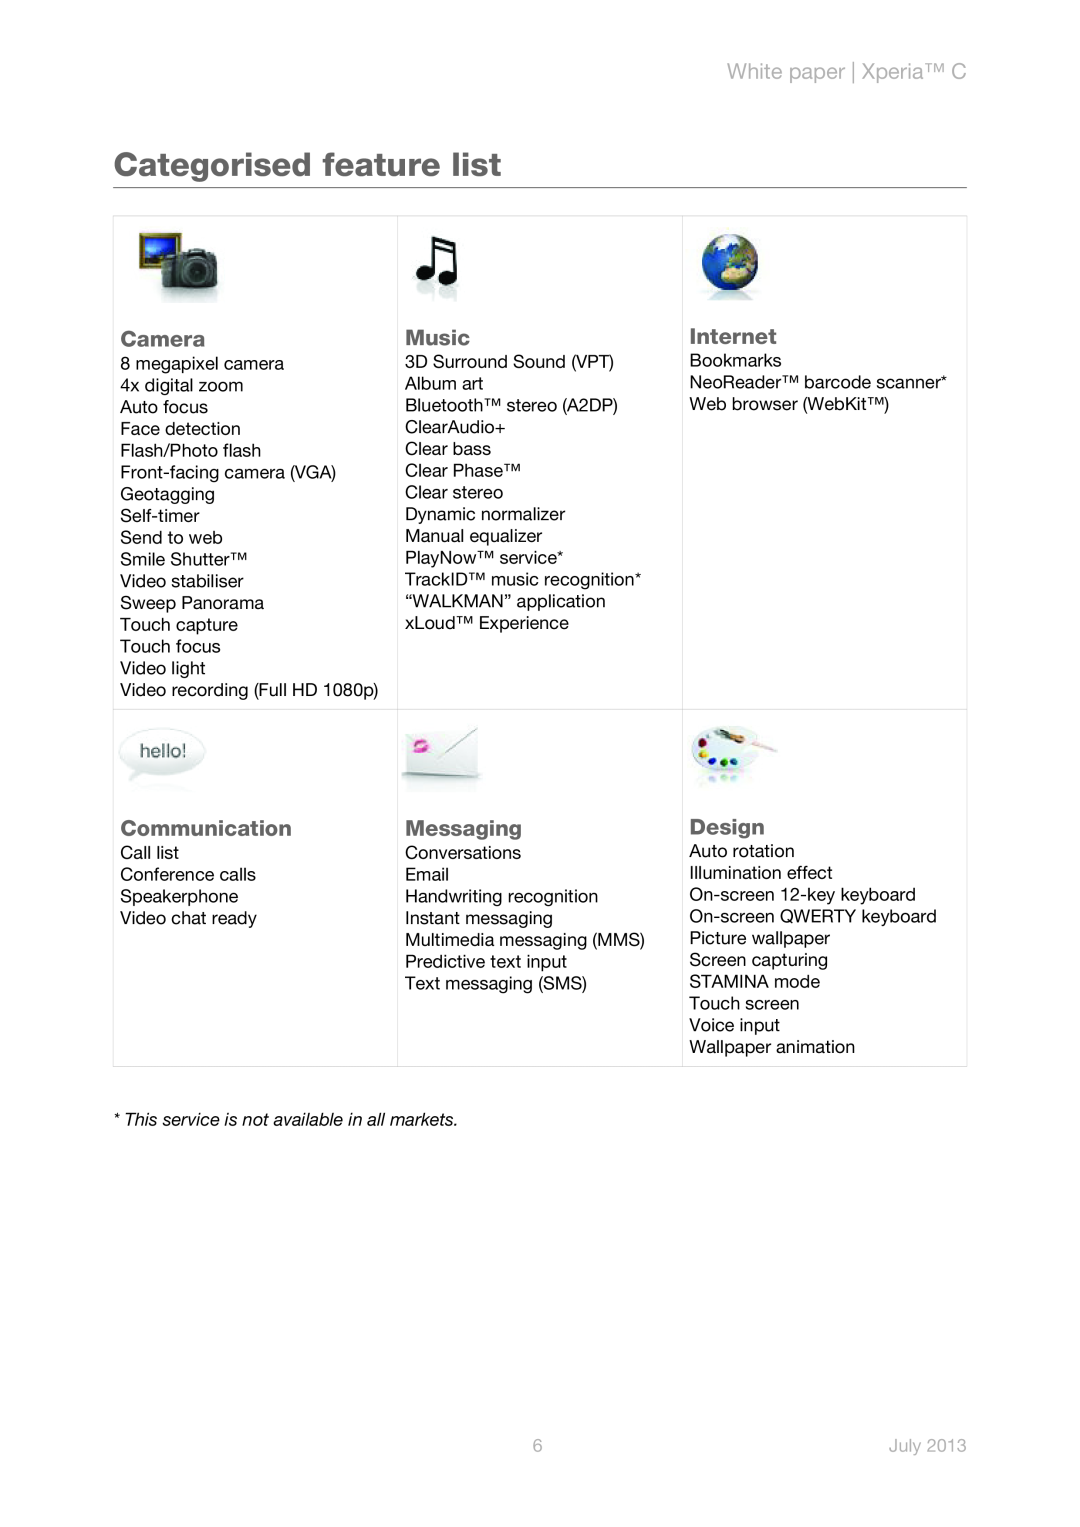 Sony s39h Categorised feature list, Camera, Music, Internet, Communication, Messaging, Design, White paper Xperia C, July 